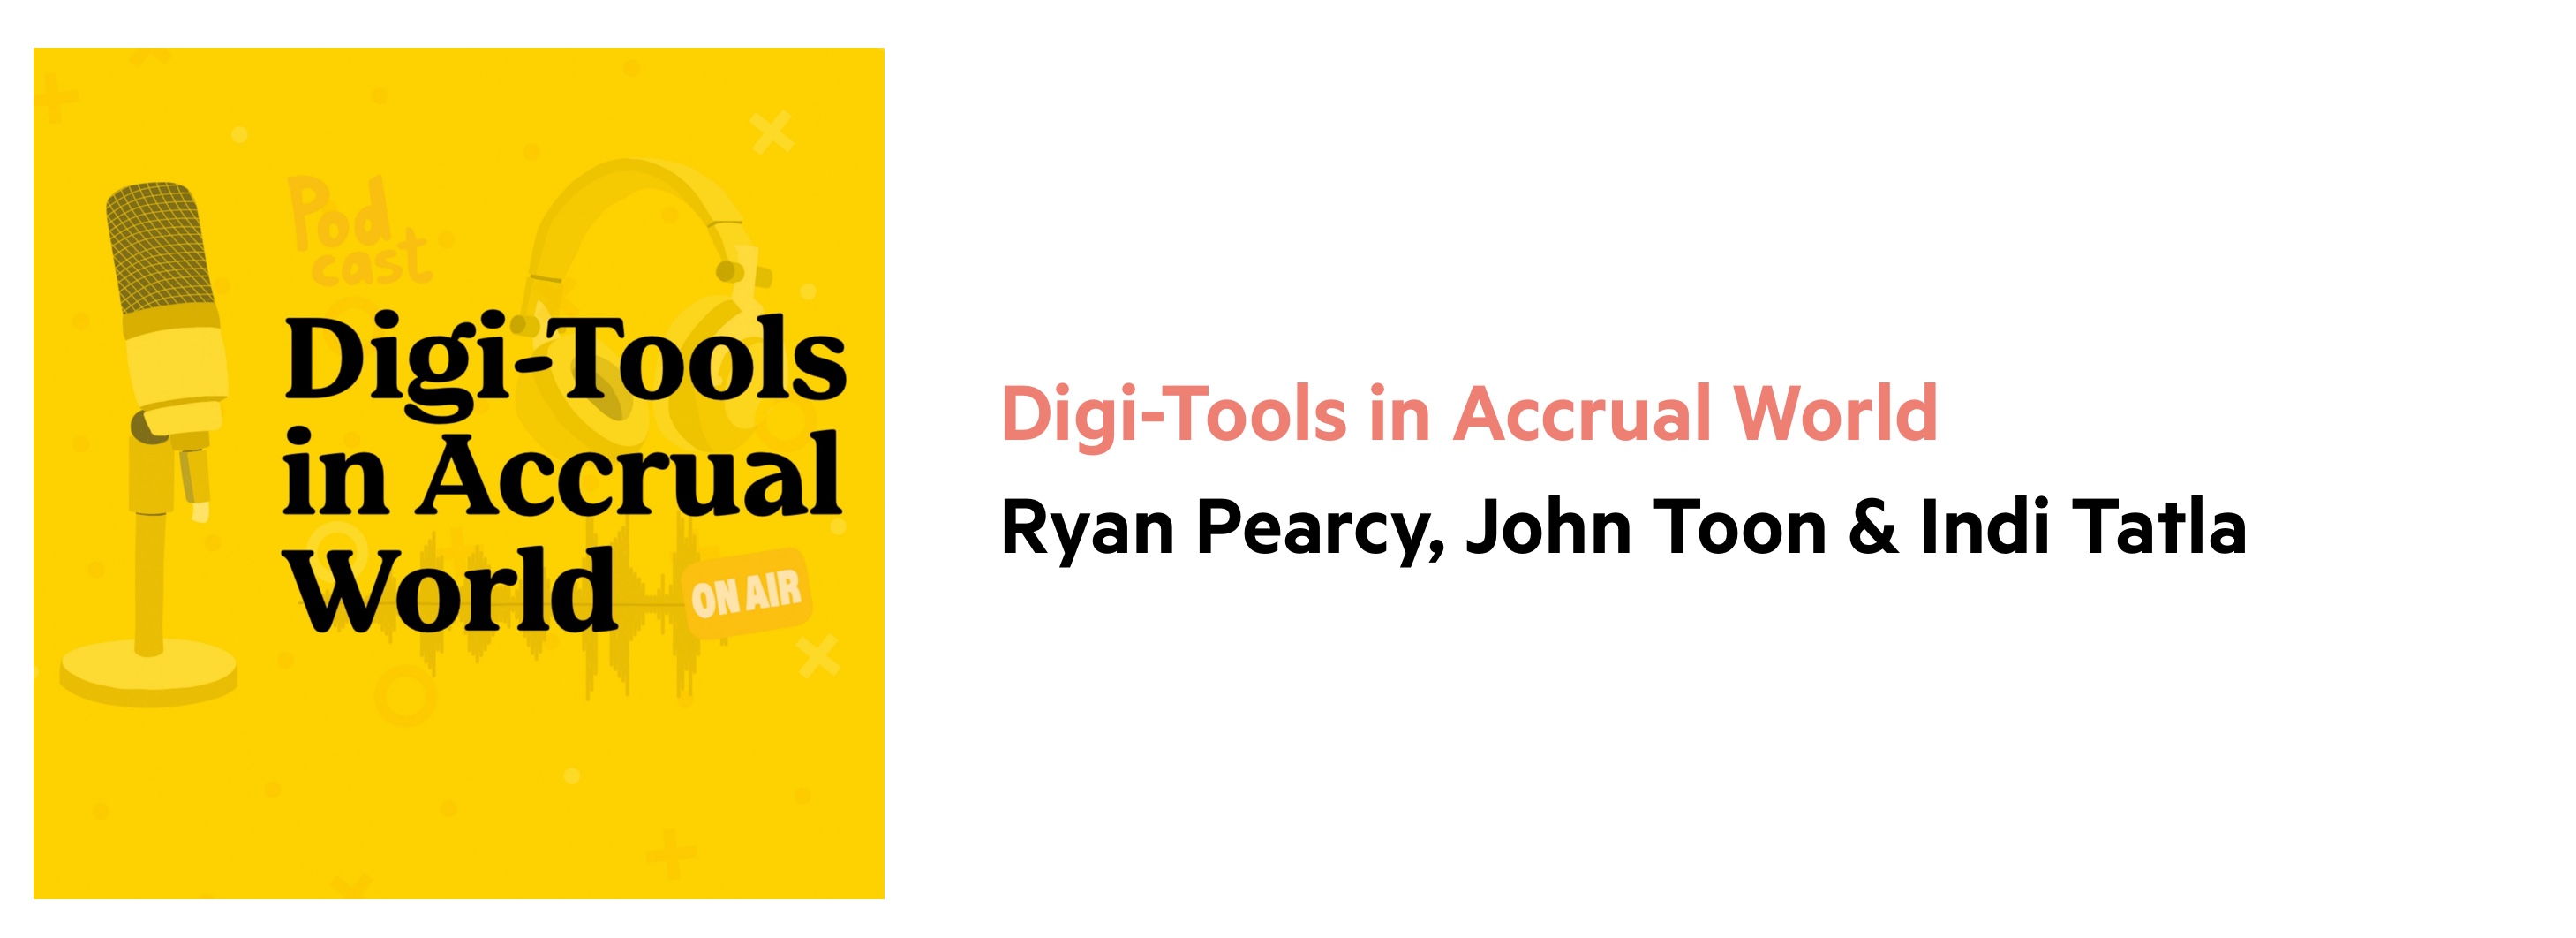 Digi-Tools in Accrual World podcast for UK accountants cover image